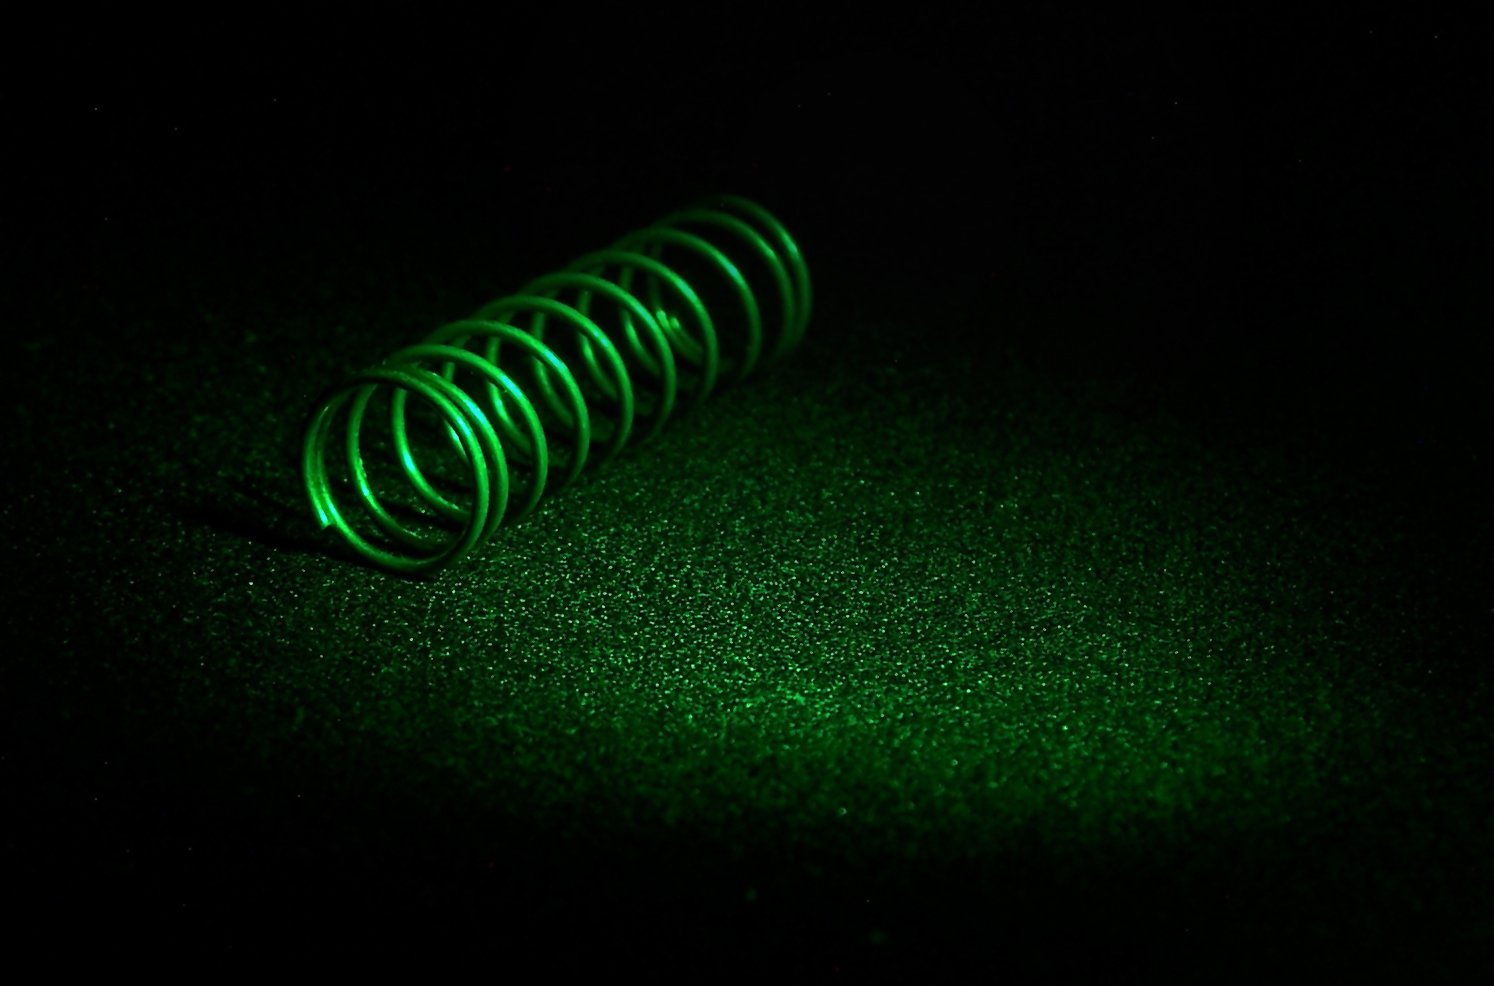 a glowing neon green spiral or spring